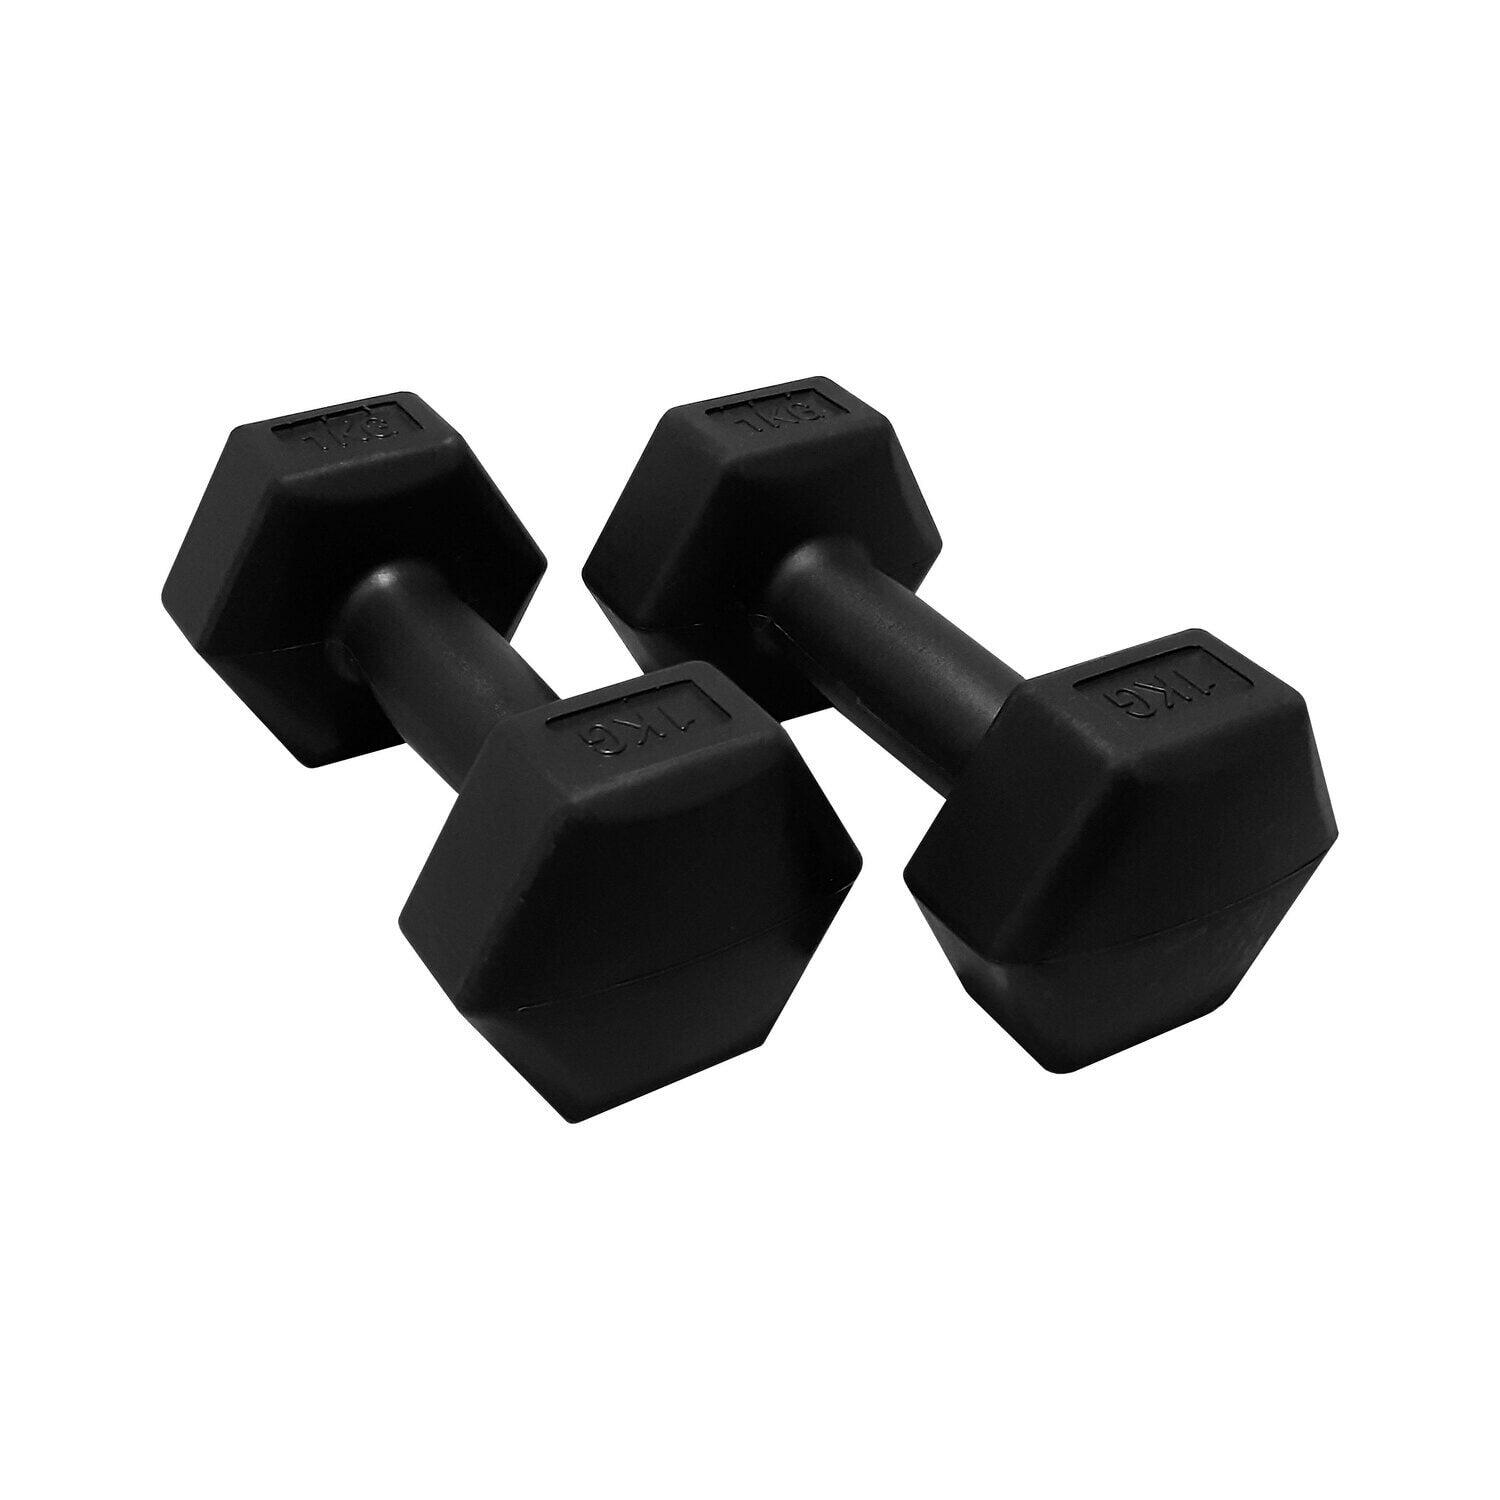 HXGN 12kg Hex Dumbbell Weight Set 2/4